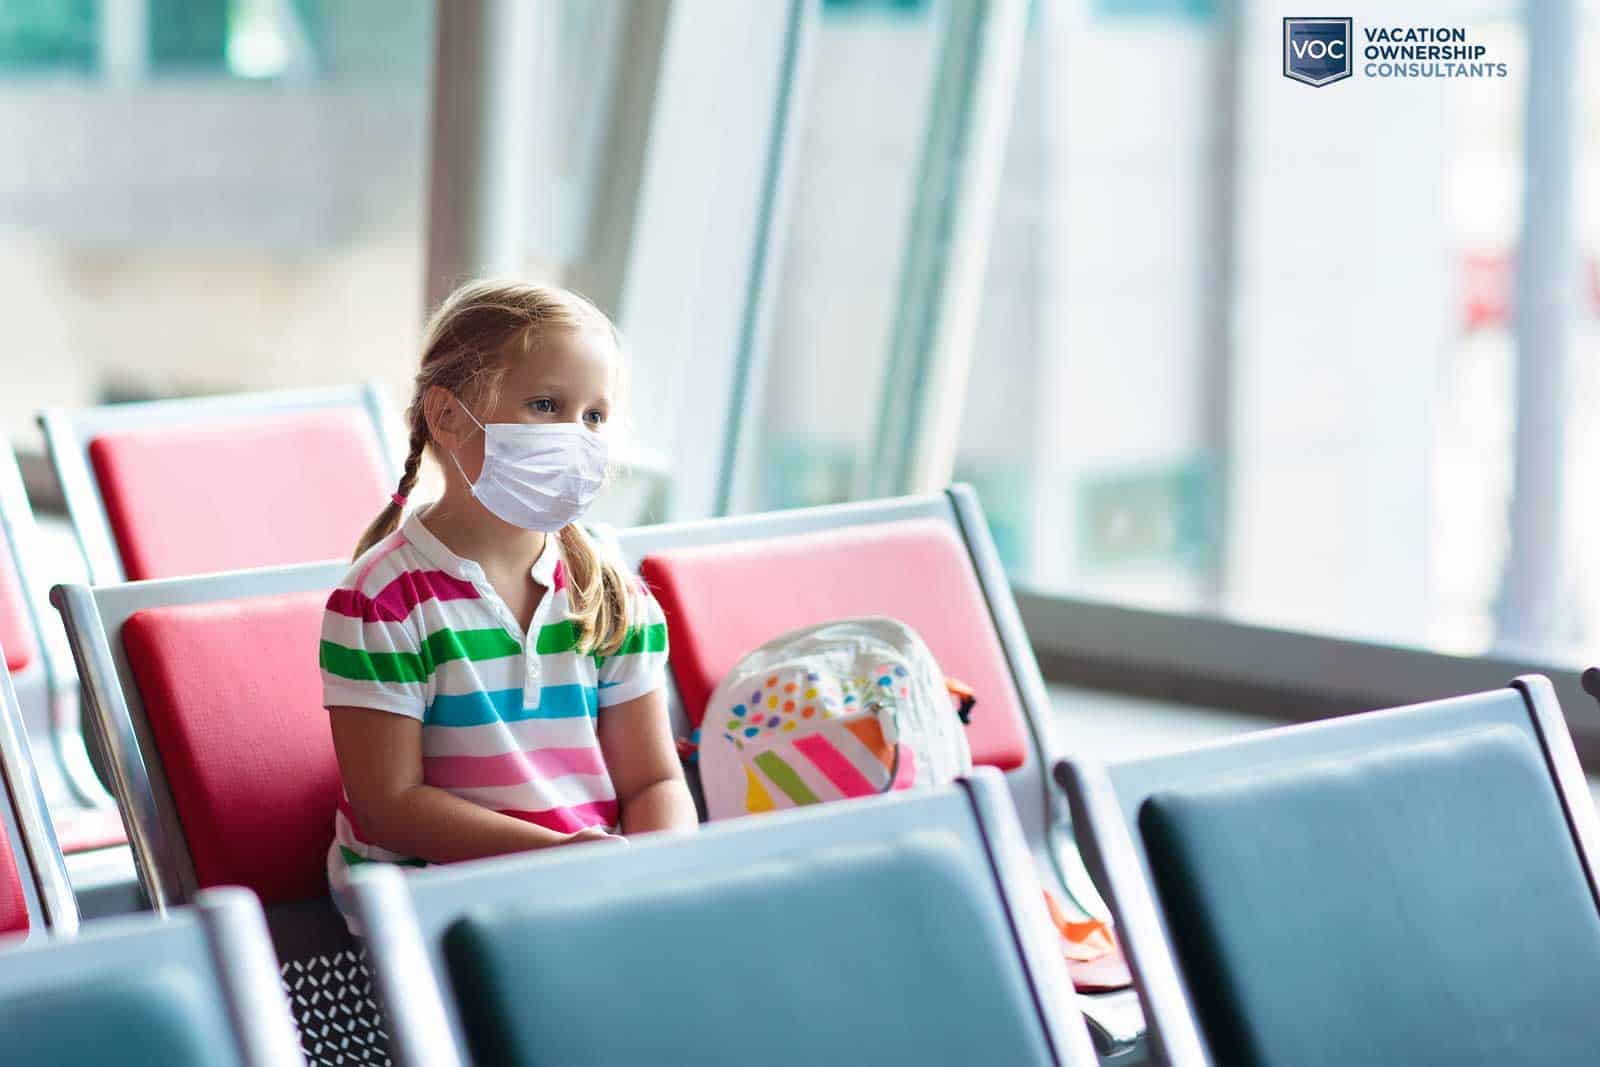 young-child-with-mask-on-face-showing-social-distancing-at-airport-to-protect-self-from-pandemic-on-vacation